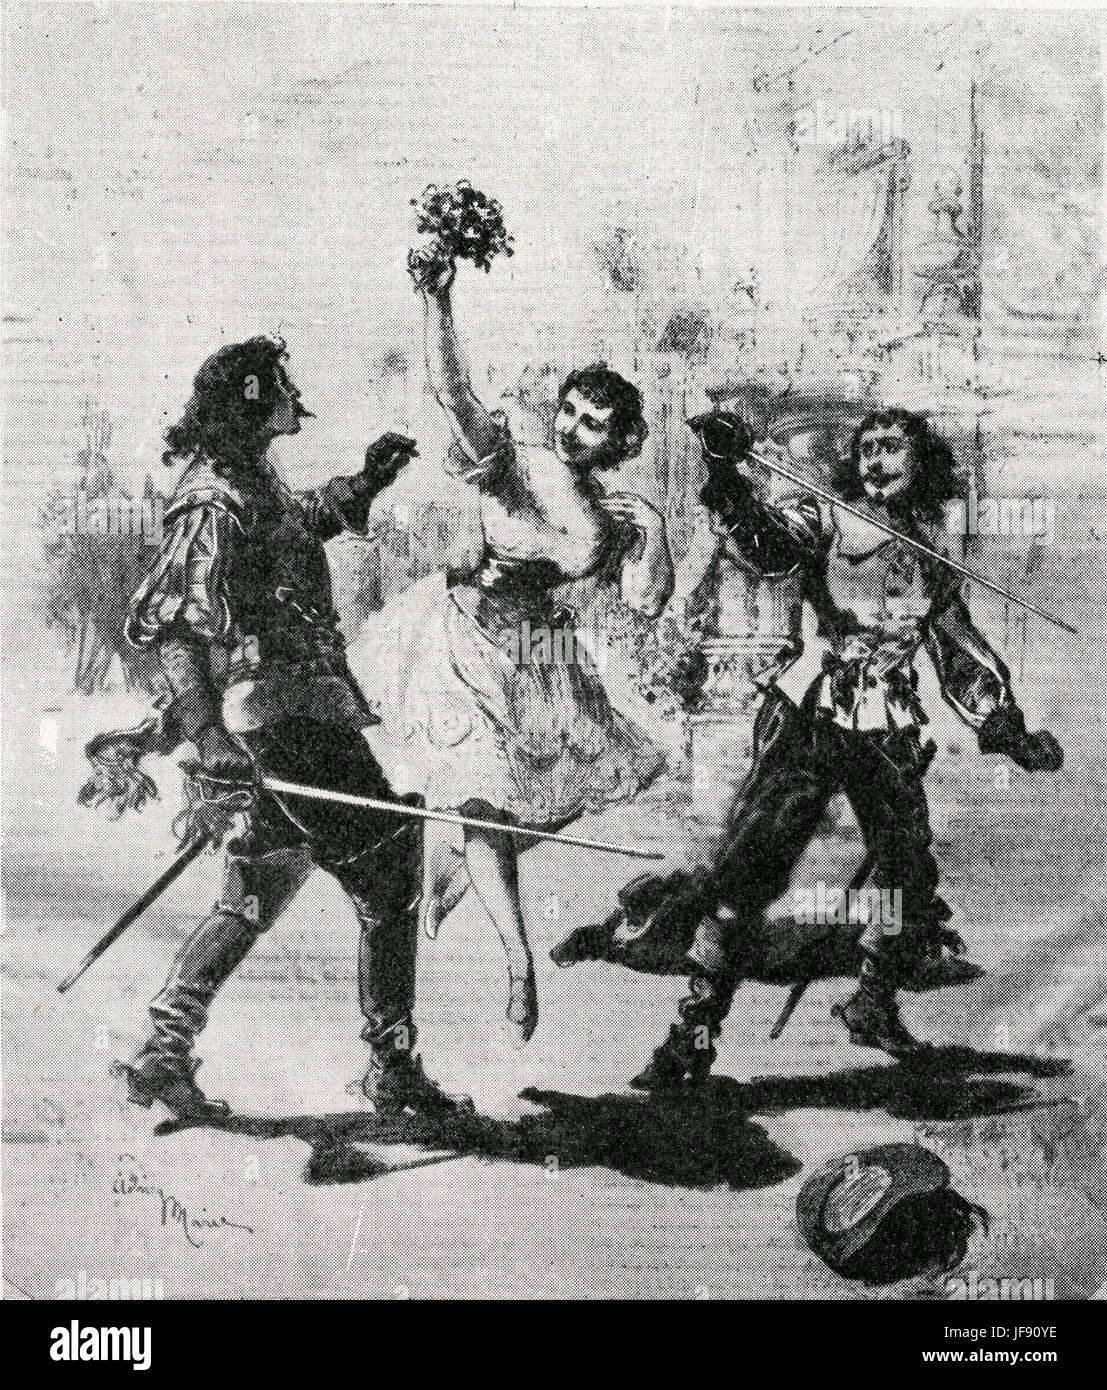 Namouna - pas des epees (sword dance). Scene from the ballet Namouna by Lalo, engraving after an illustration by Adrien Marie. French composer of Spanish descent,  27 January 1823 - 22 April 1892. Stock Photo